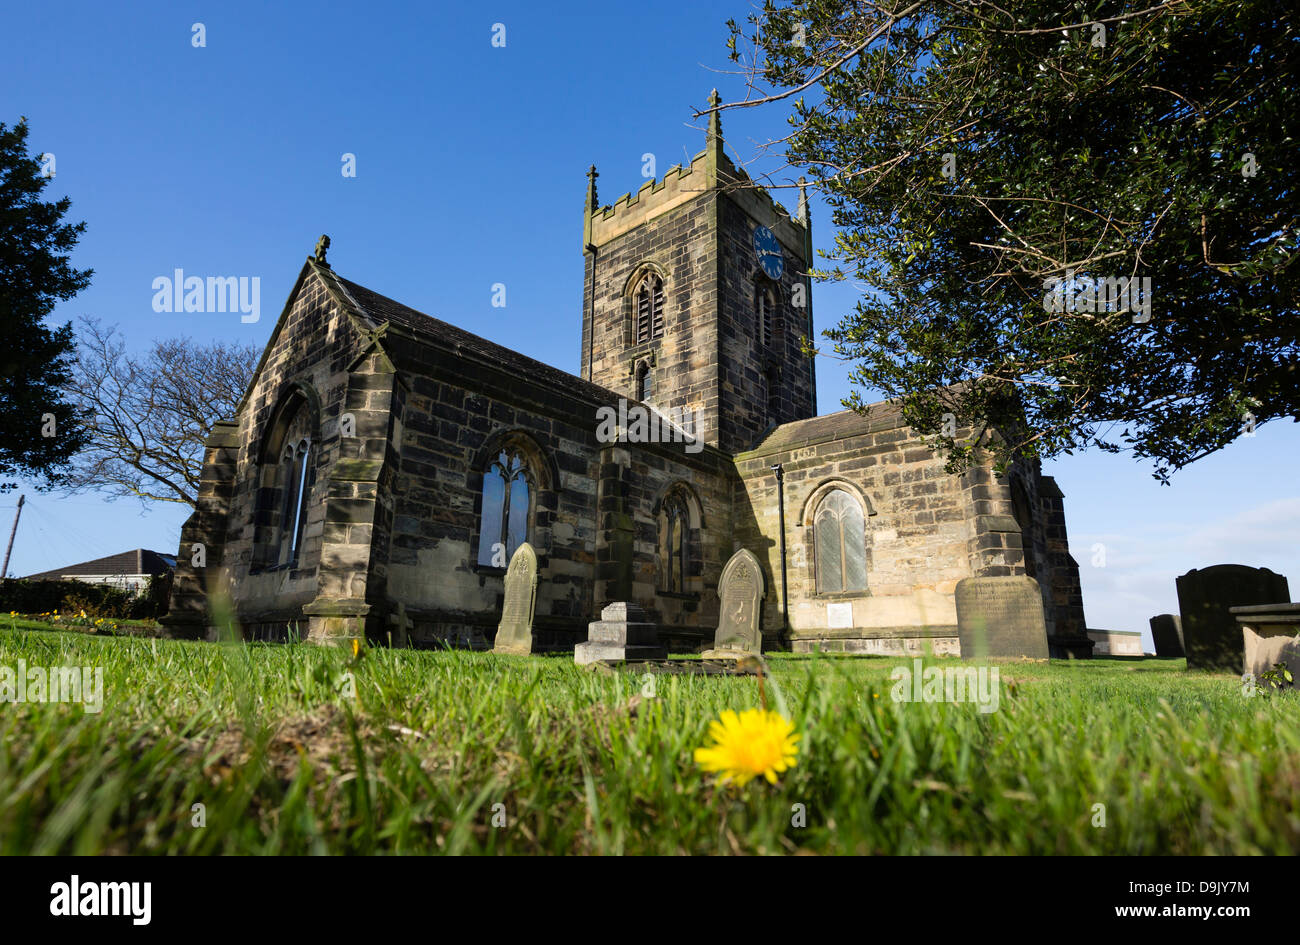 All Saints Church in Crofton near Wakefield. The church dates from the 15th century. Stock Photo